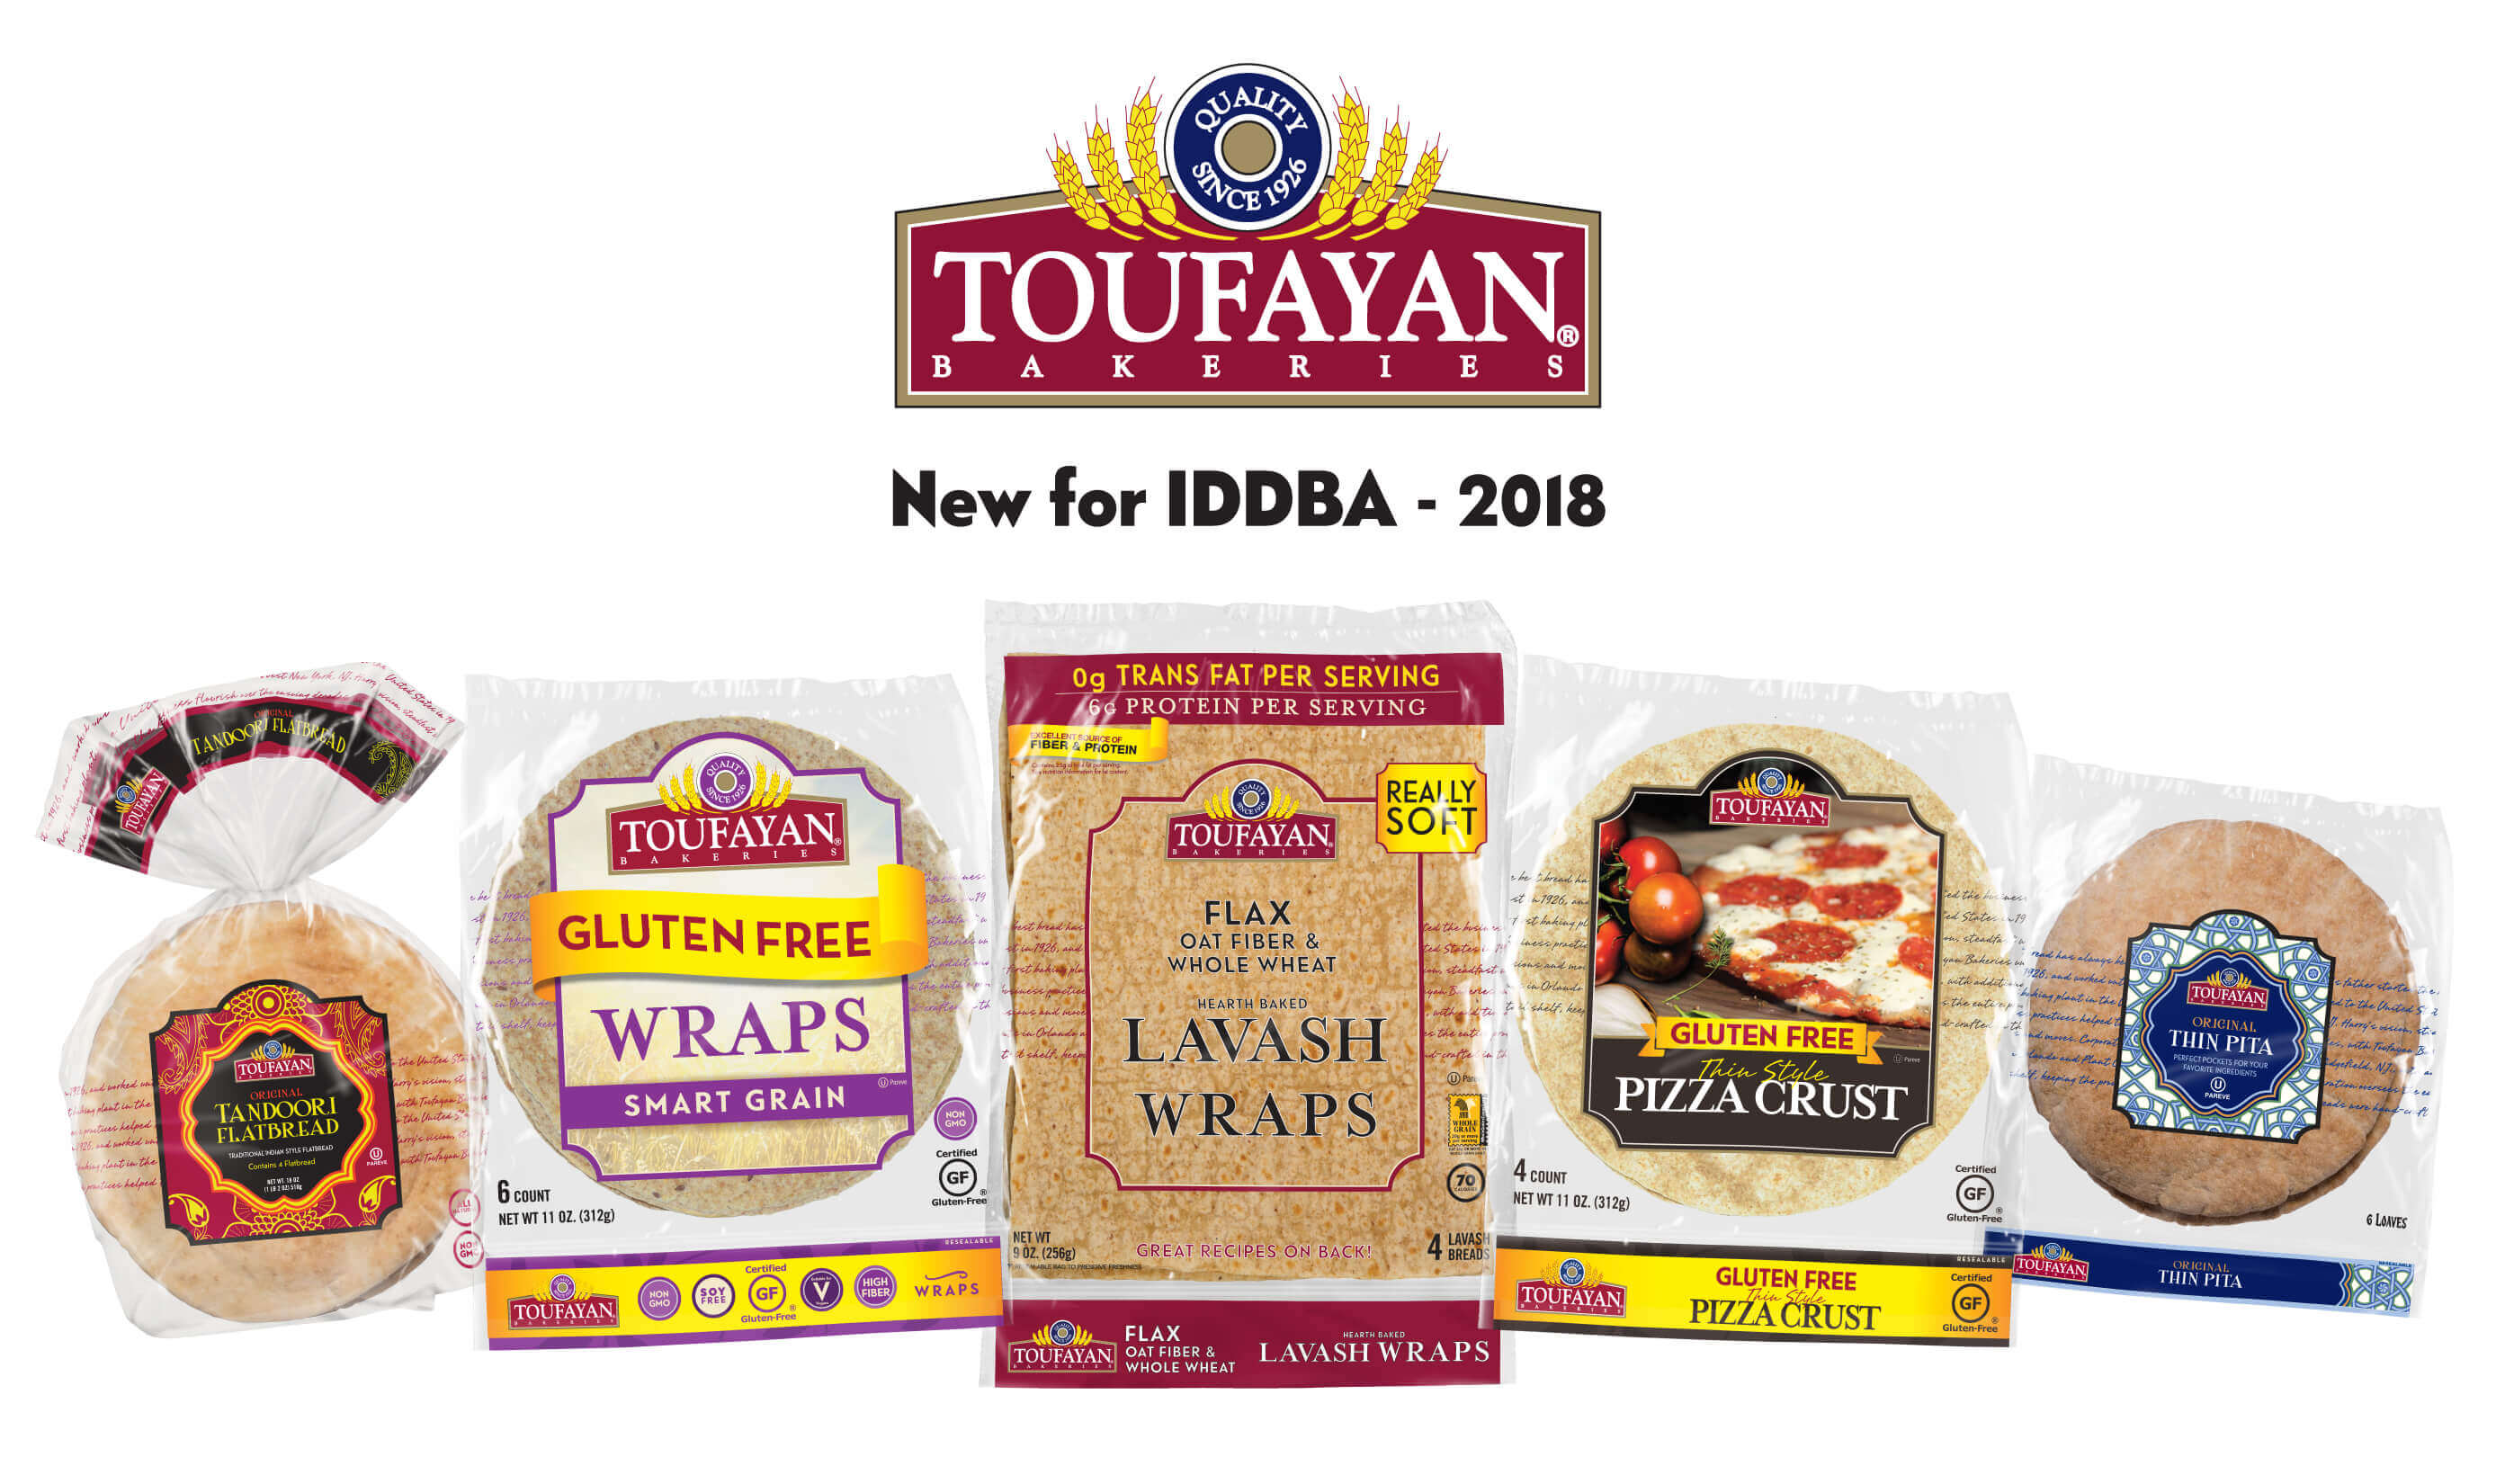 Toufayan introduces 5 new products